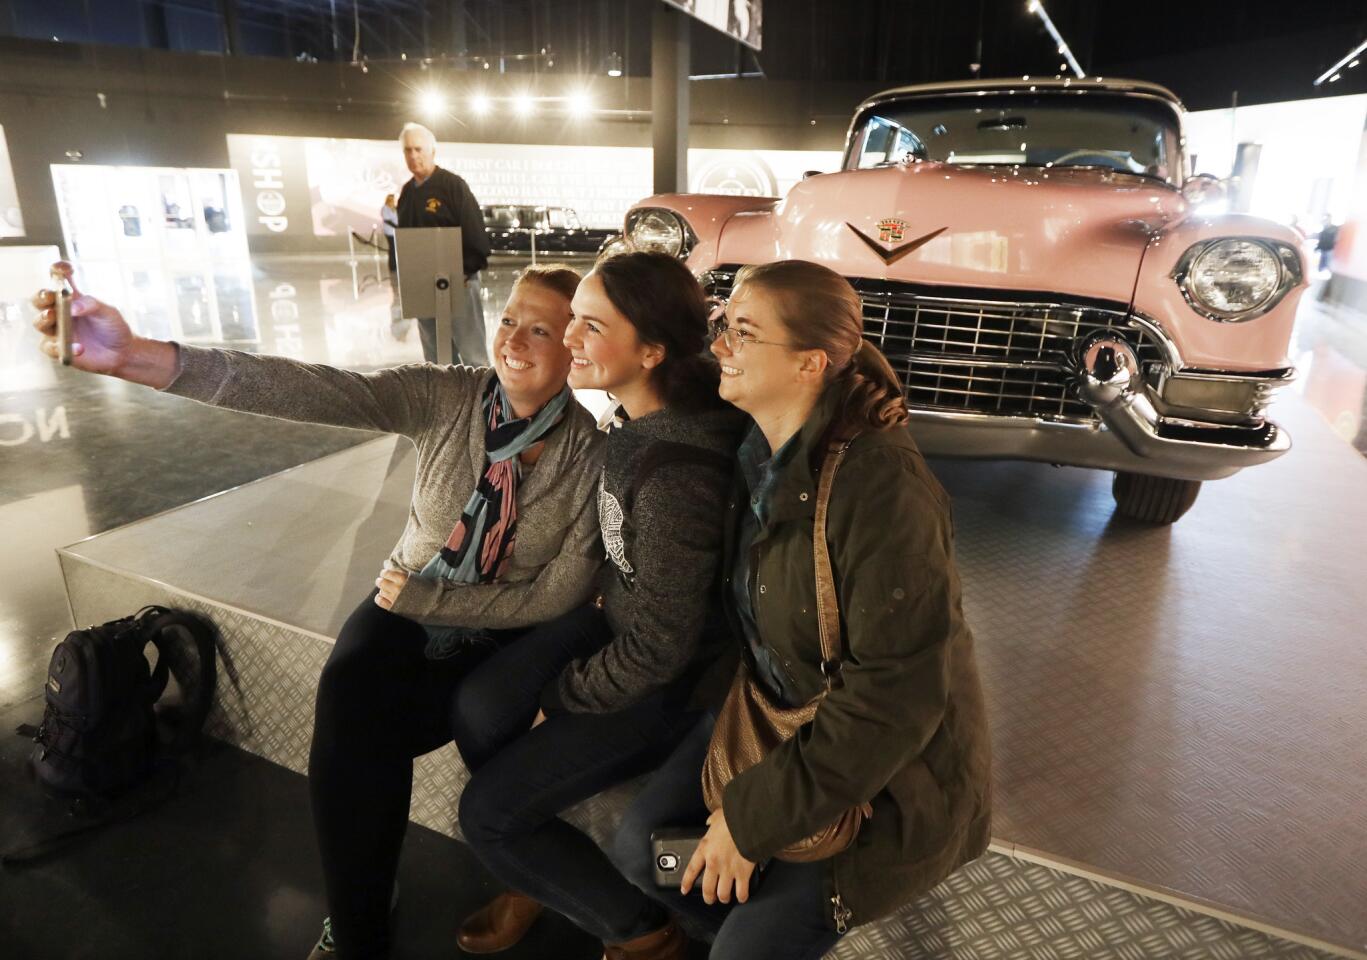 Visitors take a selfie in front of Elvis Presley's pink 1955 Cadillac Fleetwood on display at the Presley Motors Automobile Museum within the new Elvis Presley's Memphis complex in Memphis, Tenn.